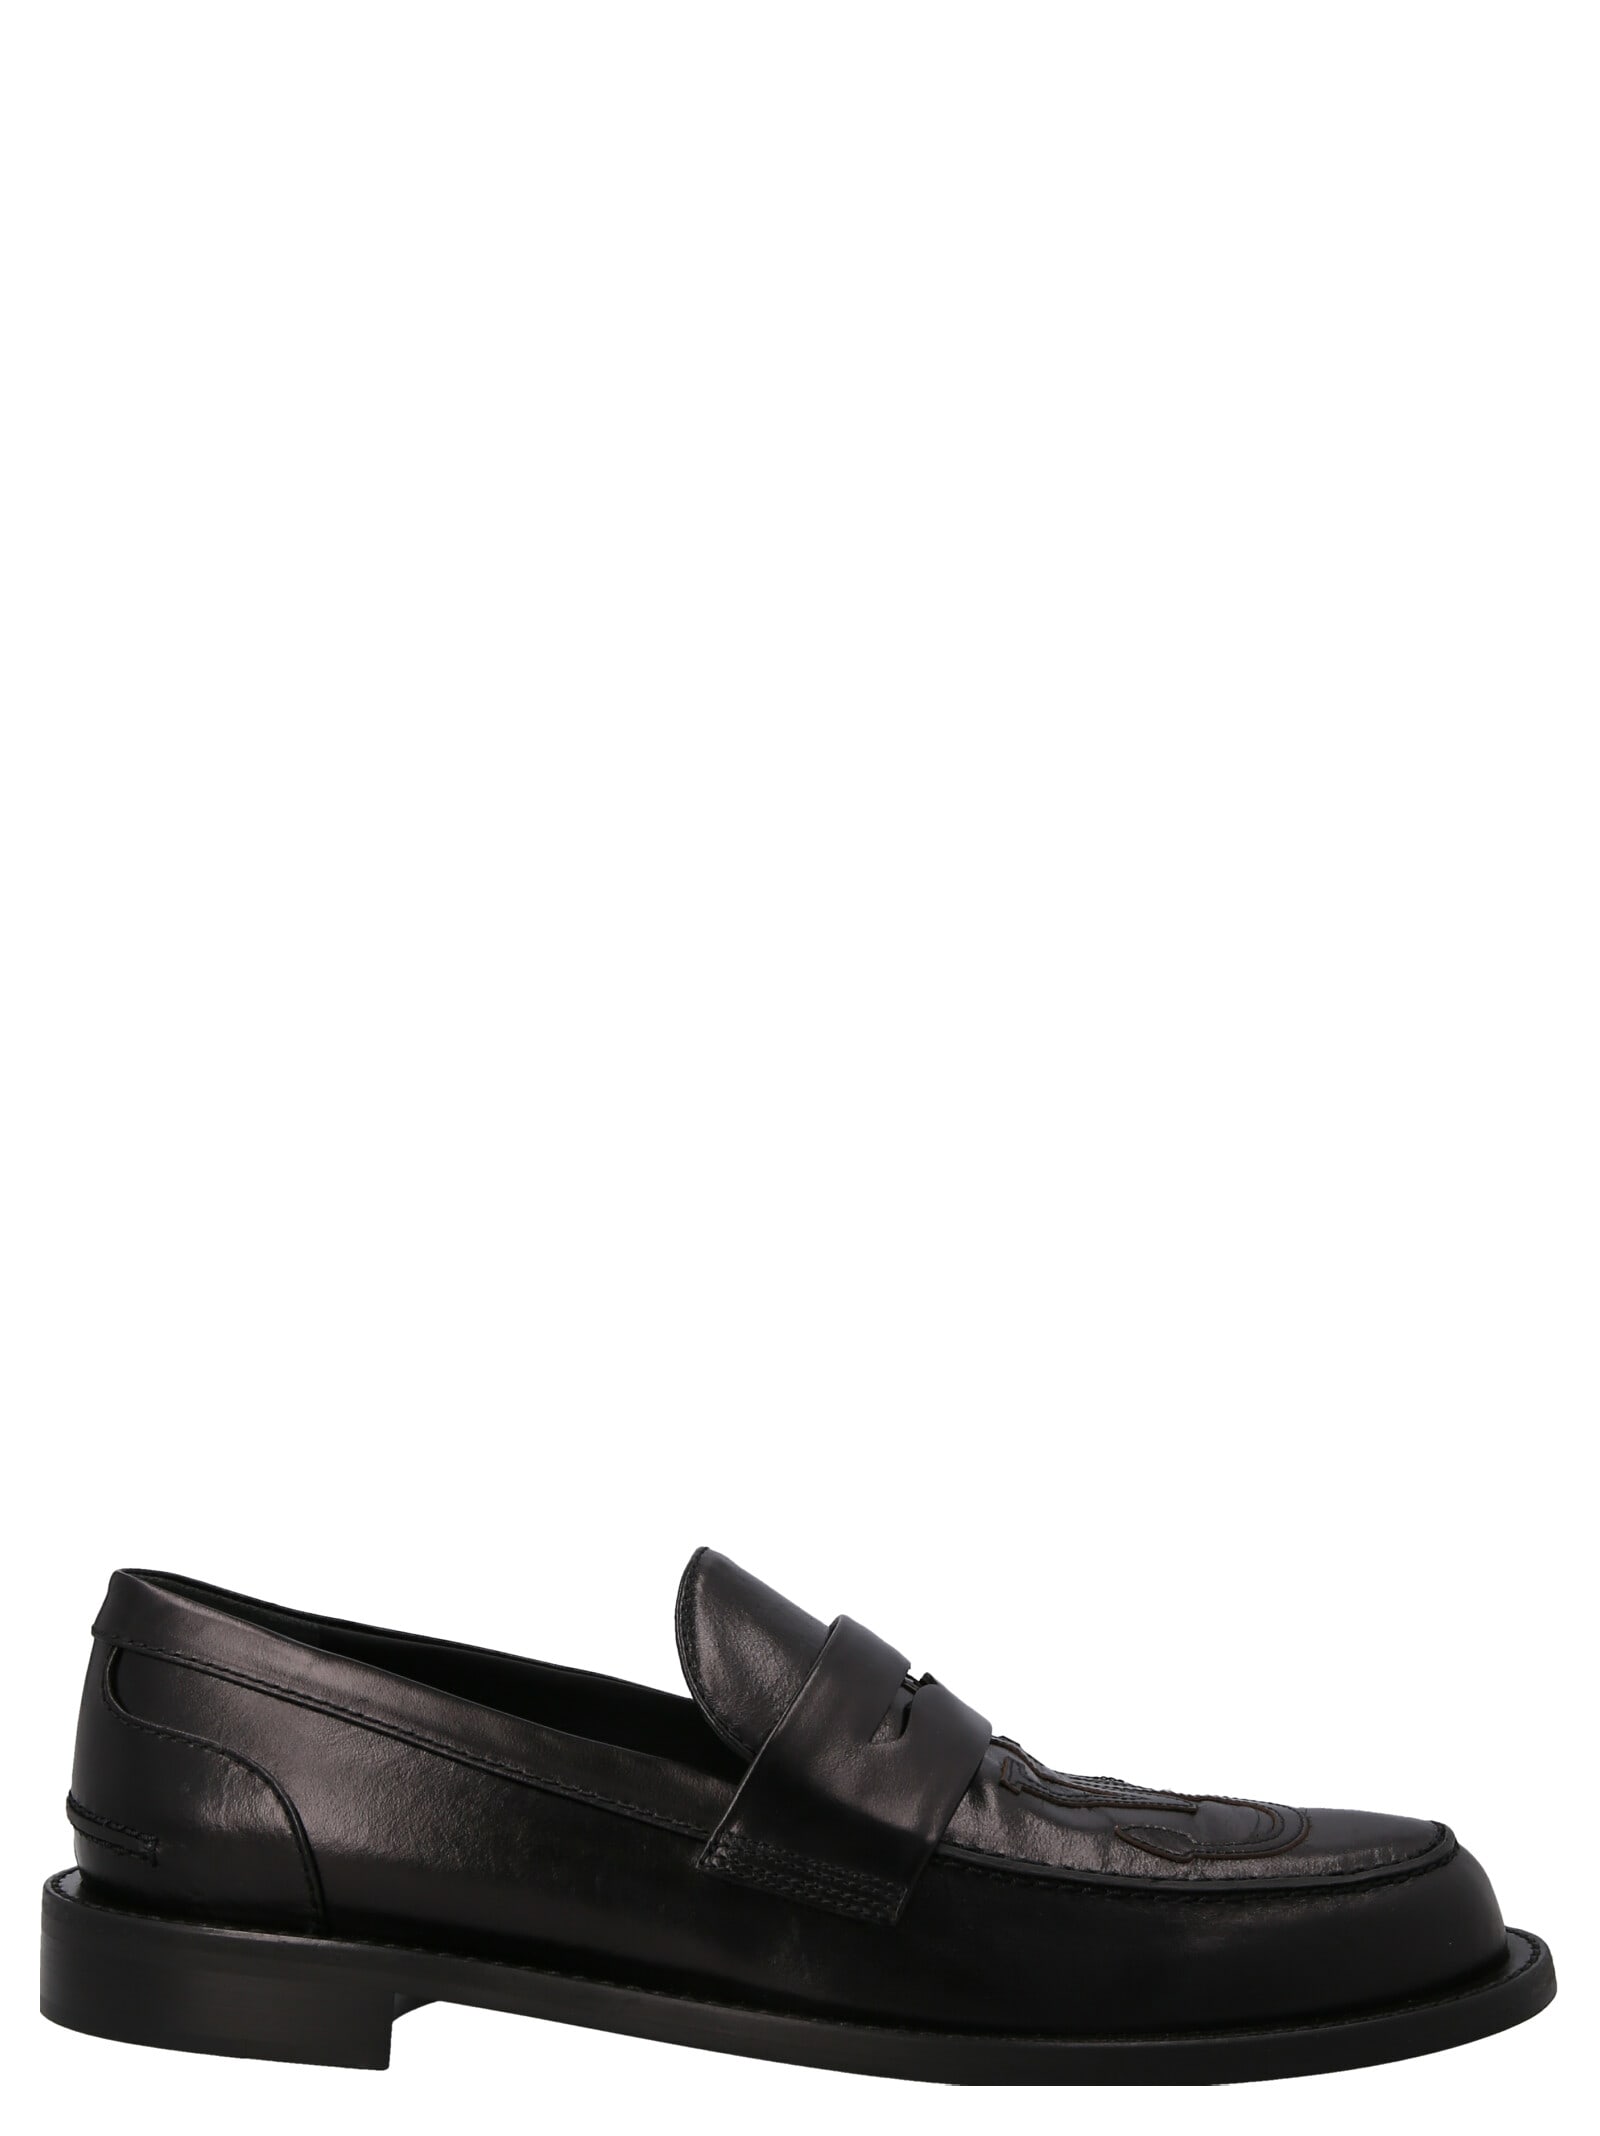 JW ANDERSON LOGO LOAFERS